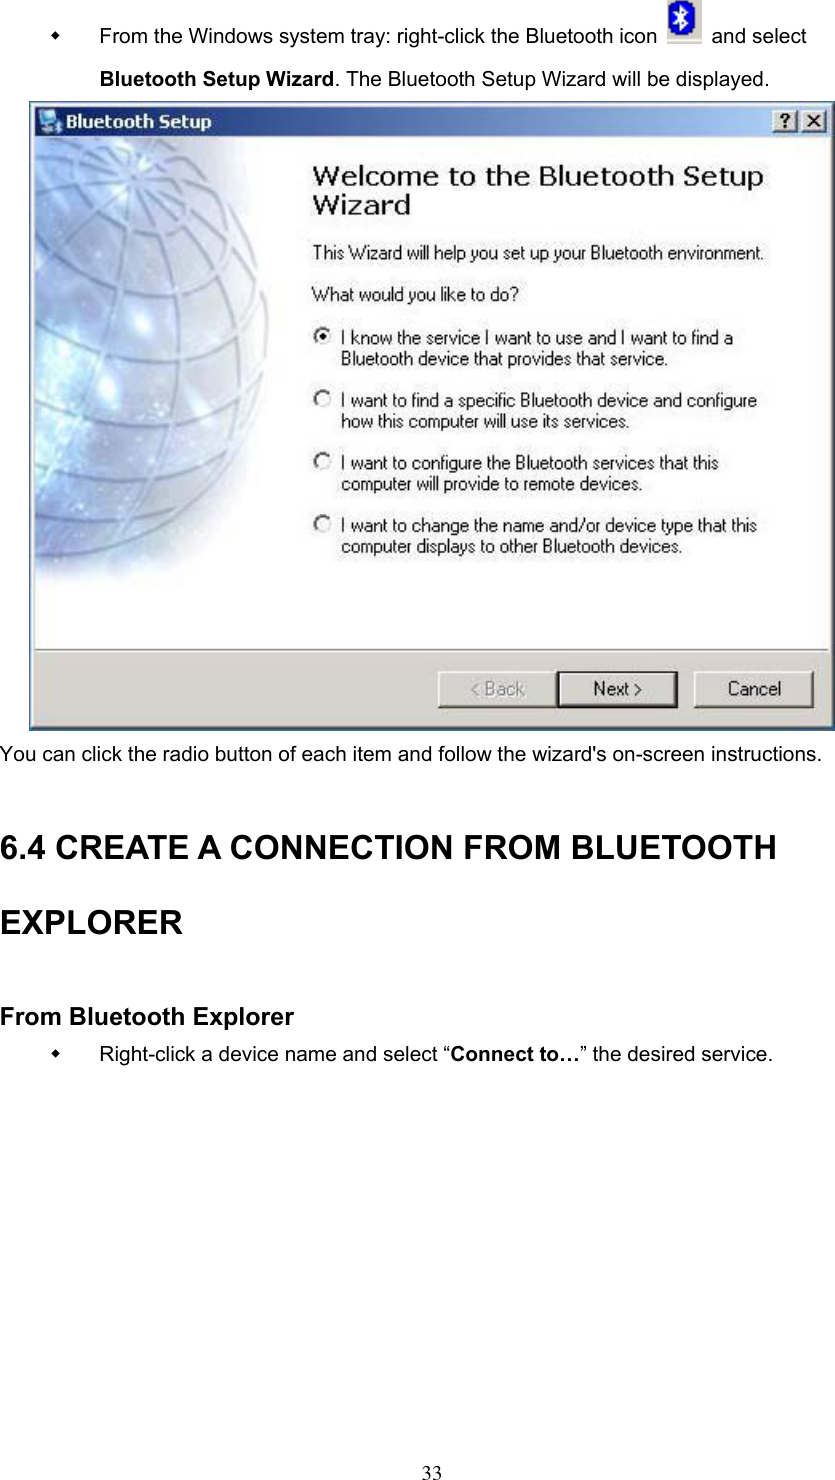   From the Windows system tray: right-click the Bluetooth icon   and select Bluetooth Setup Wizard. The Bluetooth Setup Wizard will be displayed.  You can click the radio button of each item and follow the wizard&apos;s on-screen instructions.  6.4 CREATE A CONNECTION FROM BLUETOOTH EXPLORER  From Bluetooth Explorer   Right-click a device name and select “Connect to…” the desired service.   33 